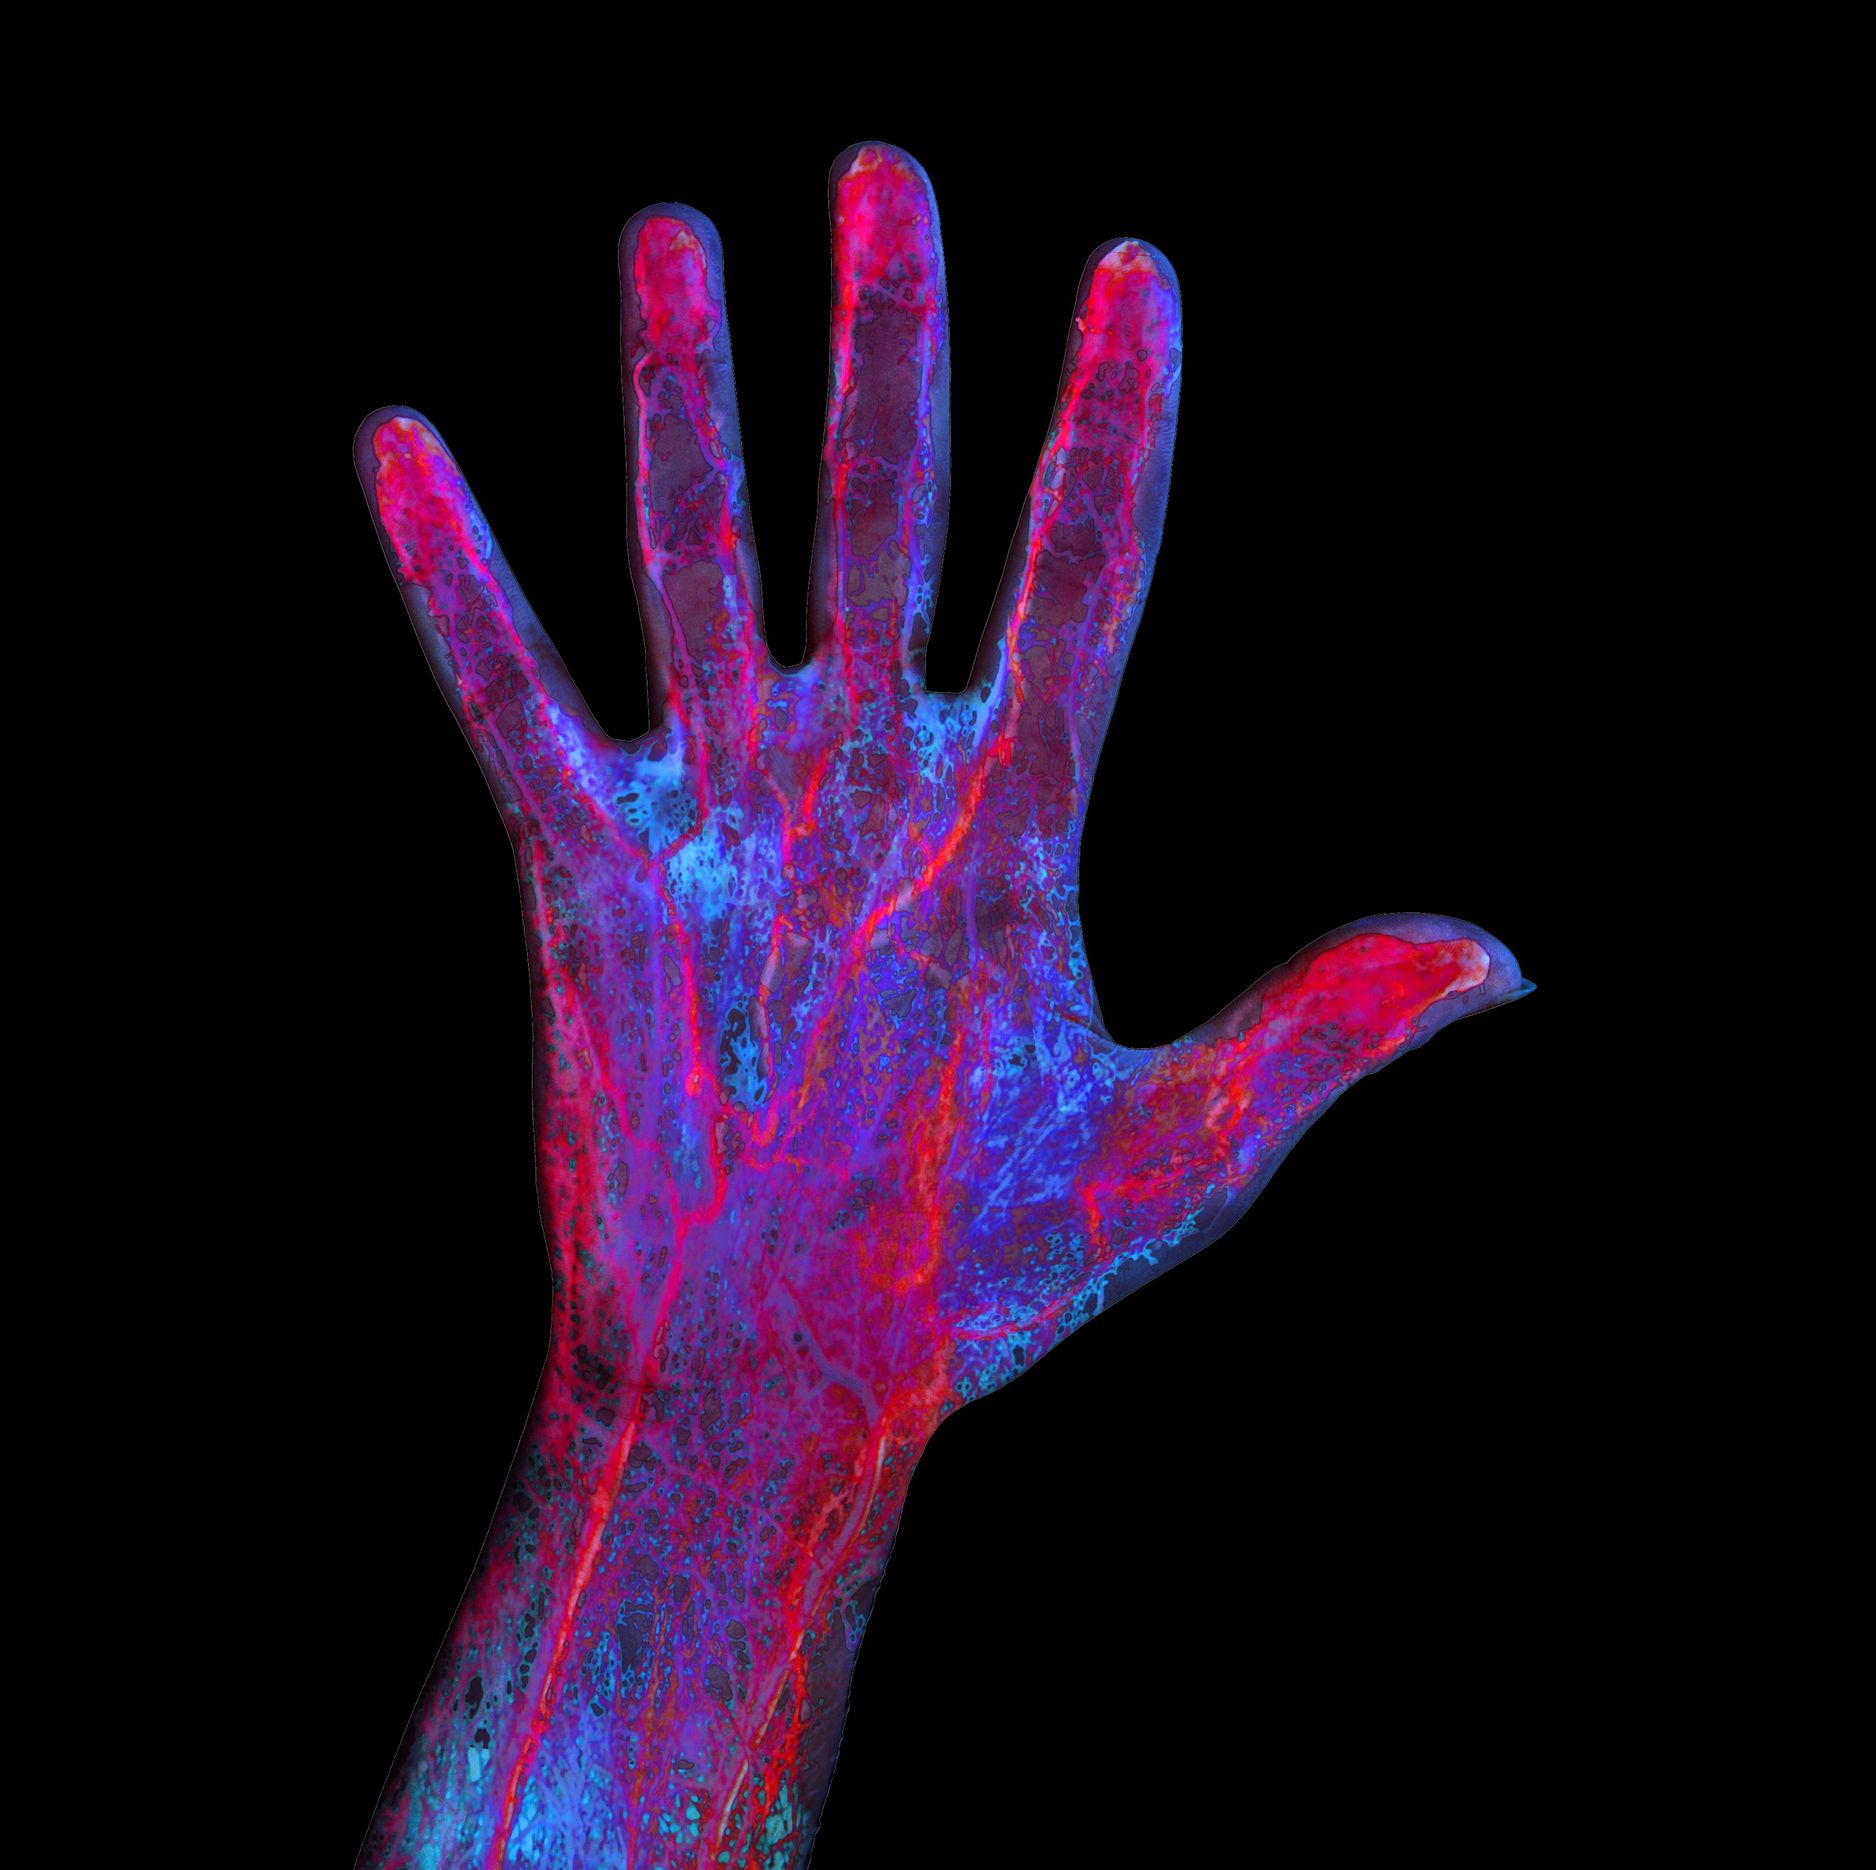 Humans Are One Crucial Step Closer to Regenerating Limbs